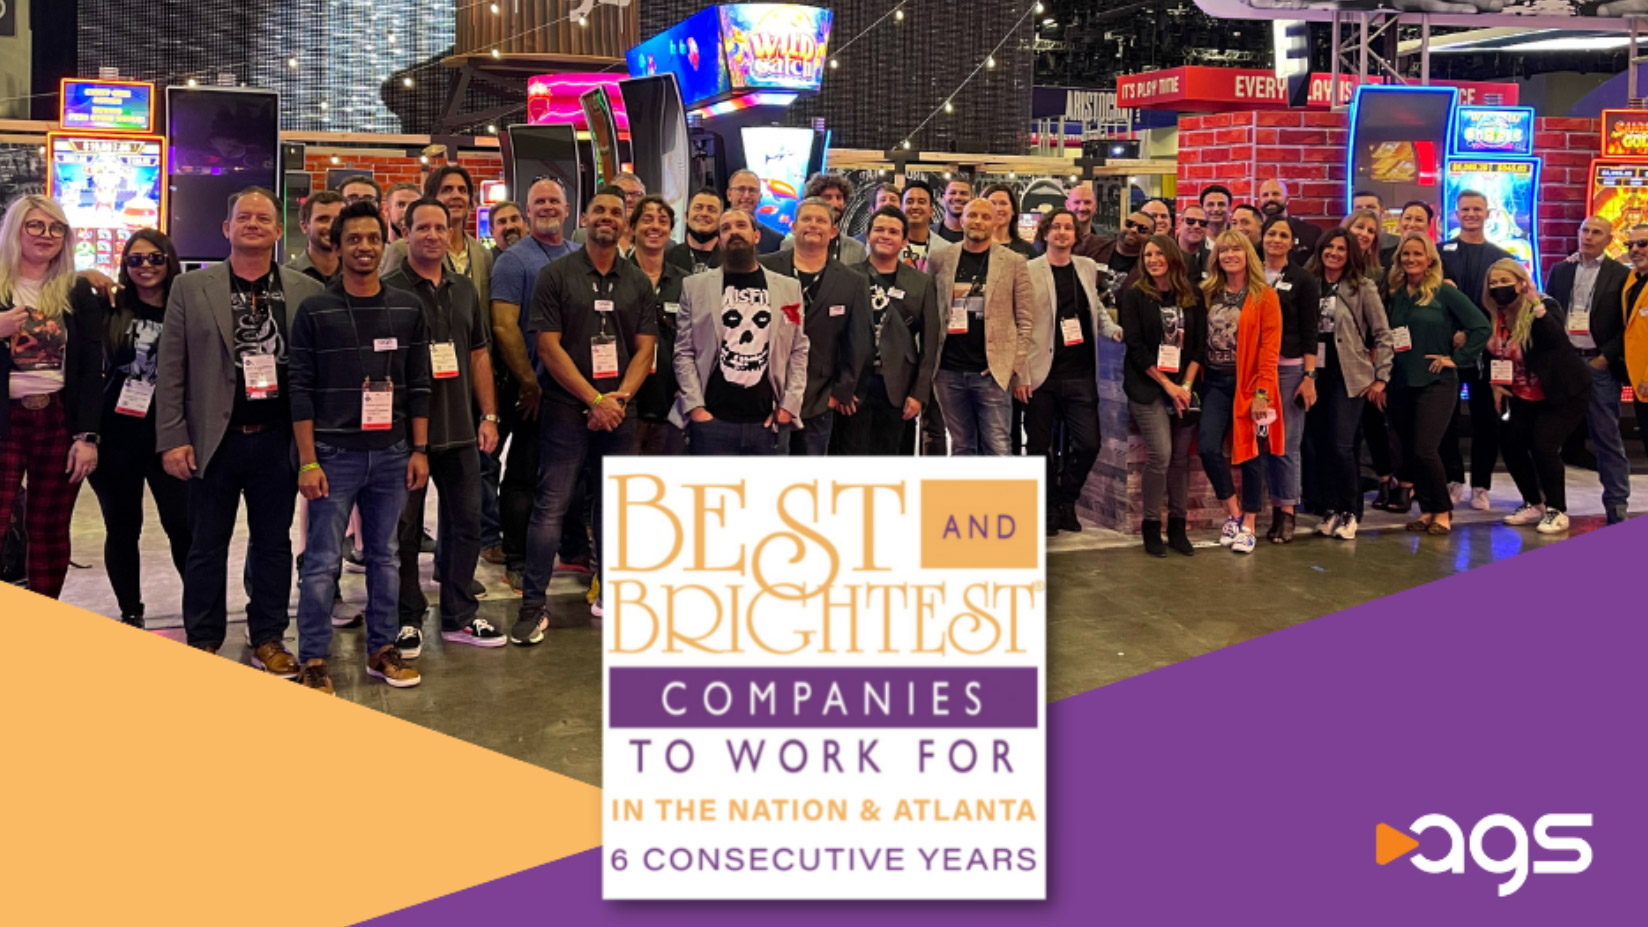 ags-ranked-among-the-best-and-brightest-companies-to-work-for-in-the-us-and-atlanta-for-6th-consecutive-year